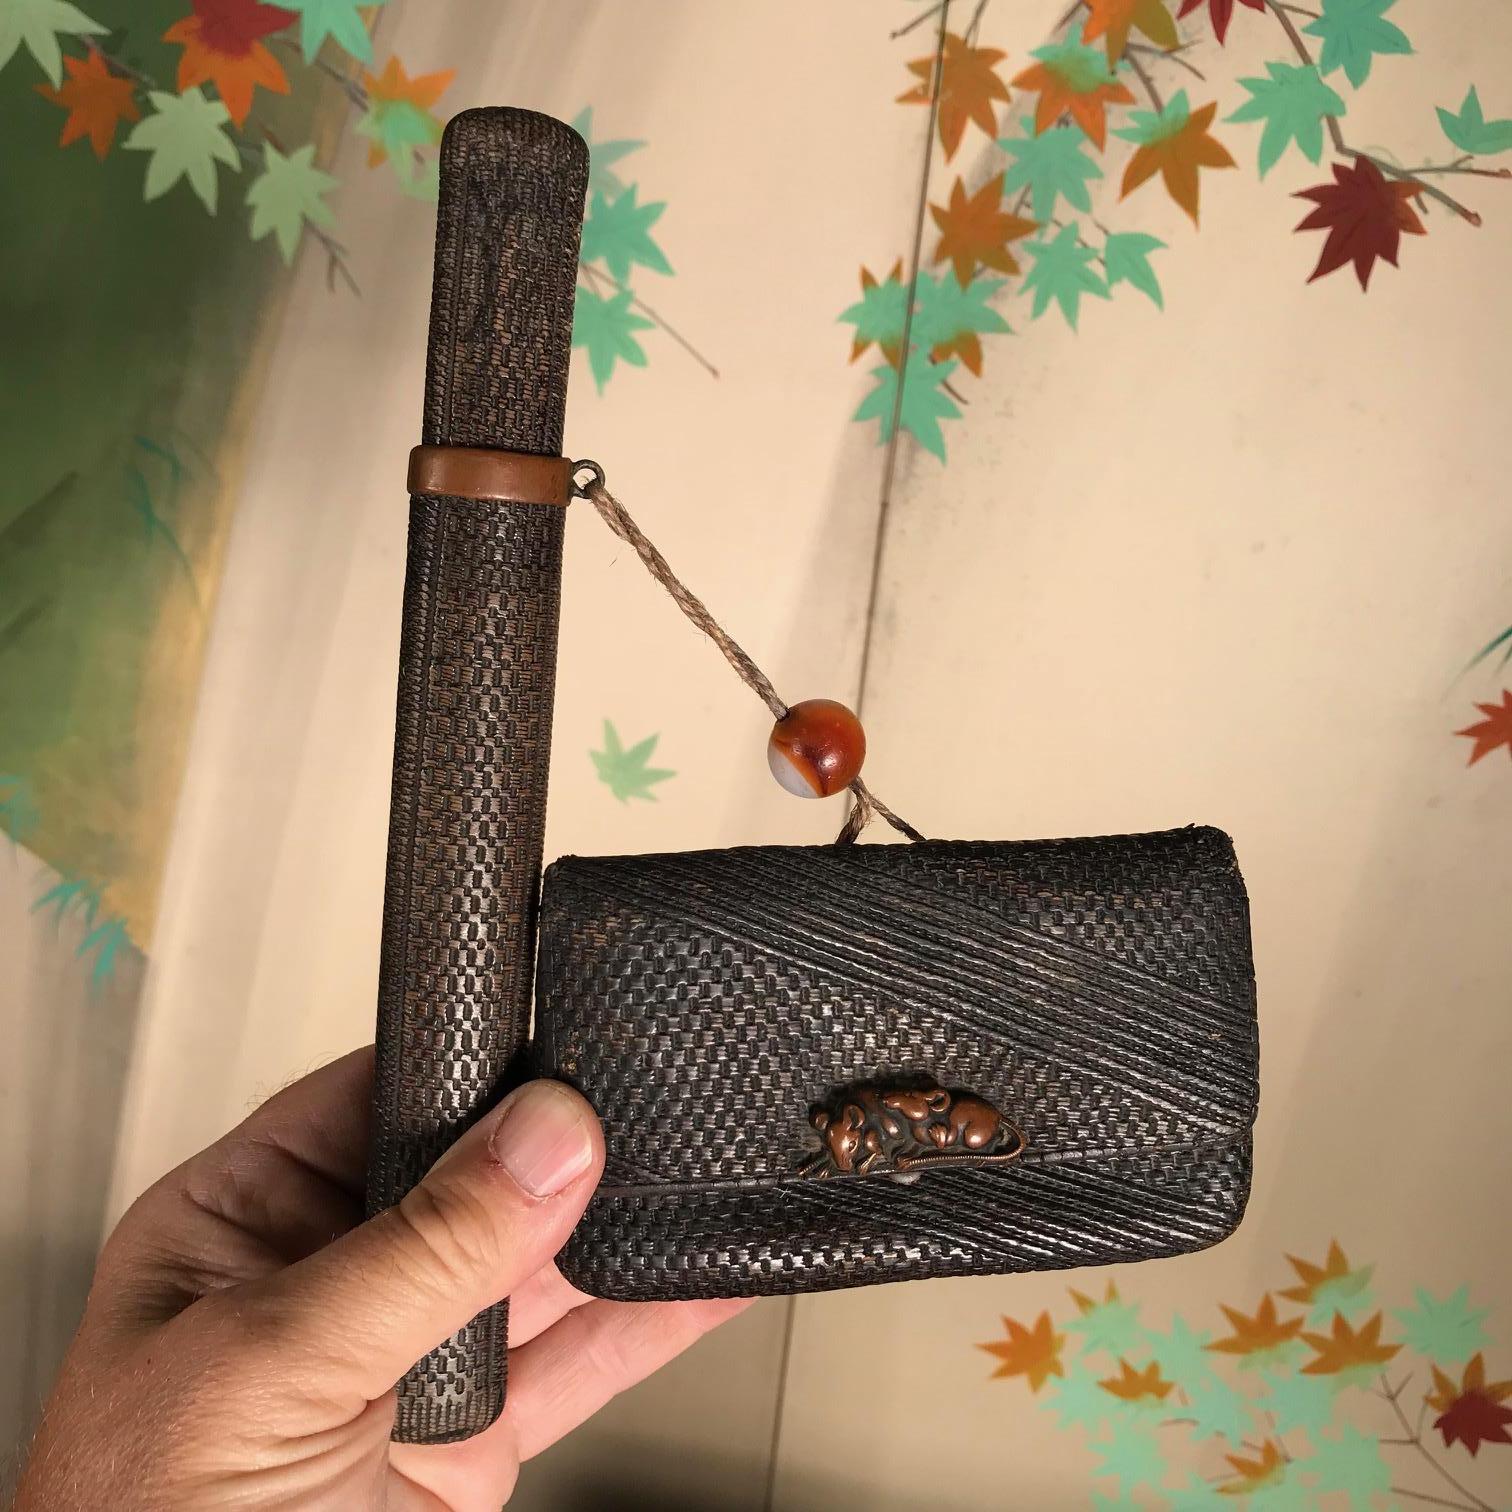 Another collection find from our most recent Japanese acquisitions trip.

Unusual Mice Find!

This is a complete set foursome of Japanese antiques including and original kiseru pipe, its leather cover/ slip box, a leather pouch with a metal